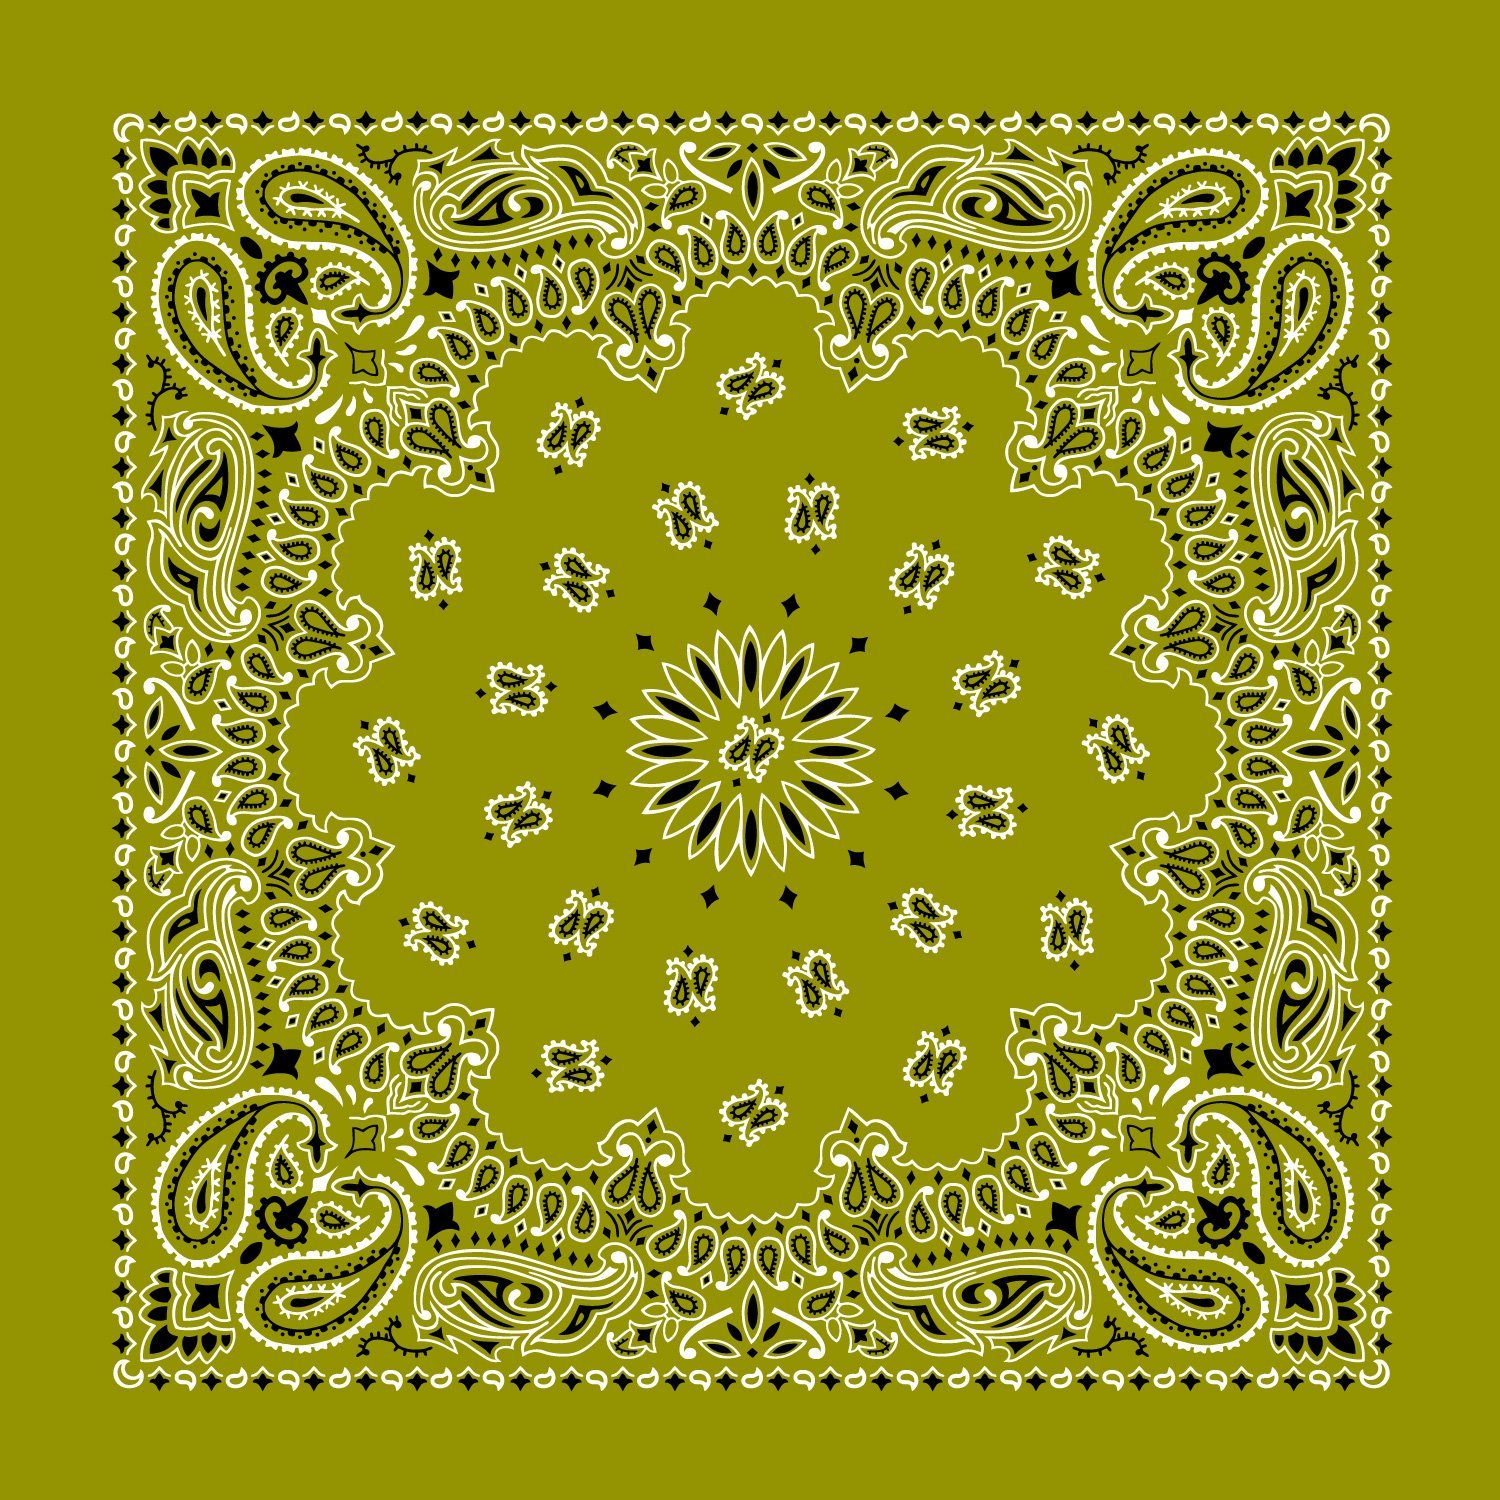 600pcs Olive Green Olive Green Open Center Paisley Bandana - Made in USA 100% Cotton 22